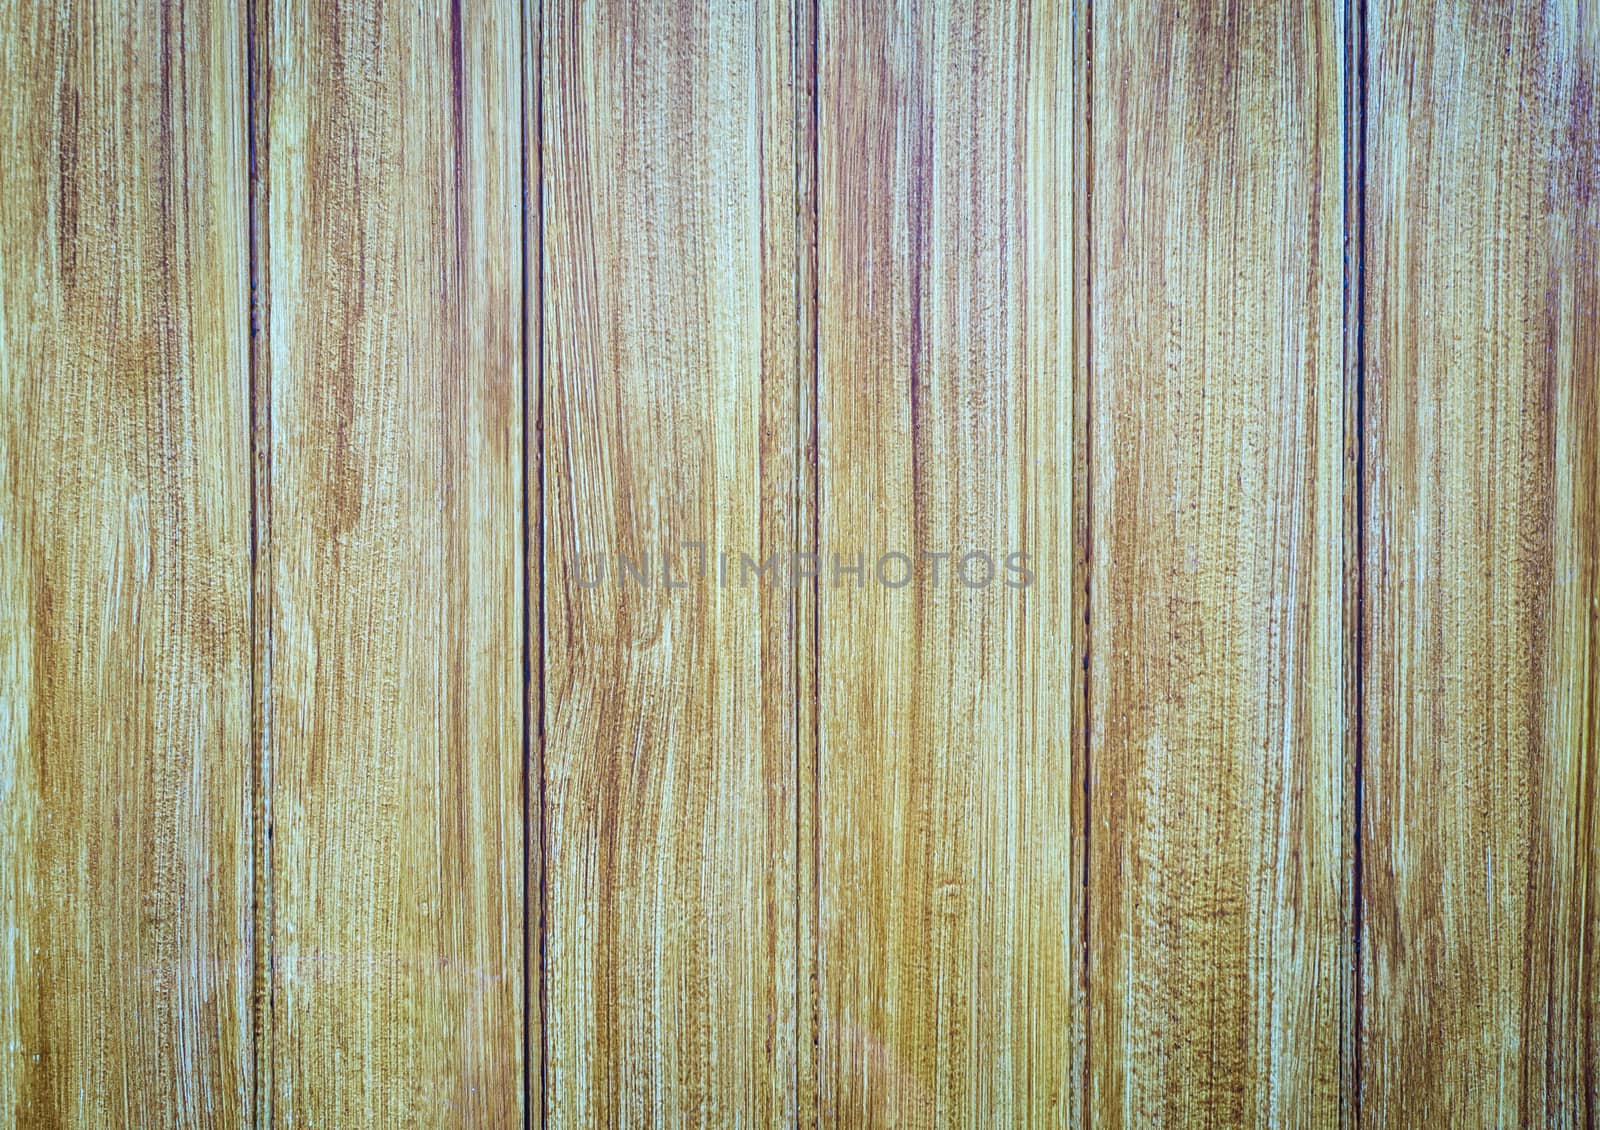 Oak wood grain background with a pattern. The wood is used to de by pkproject